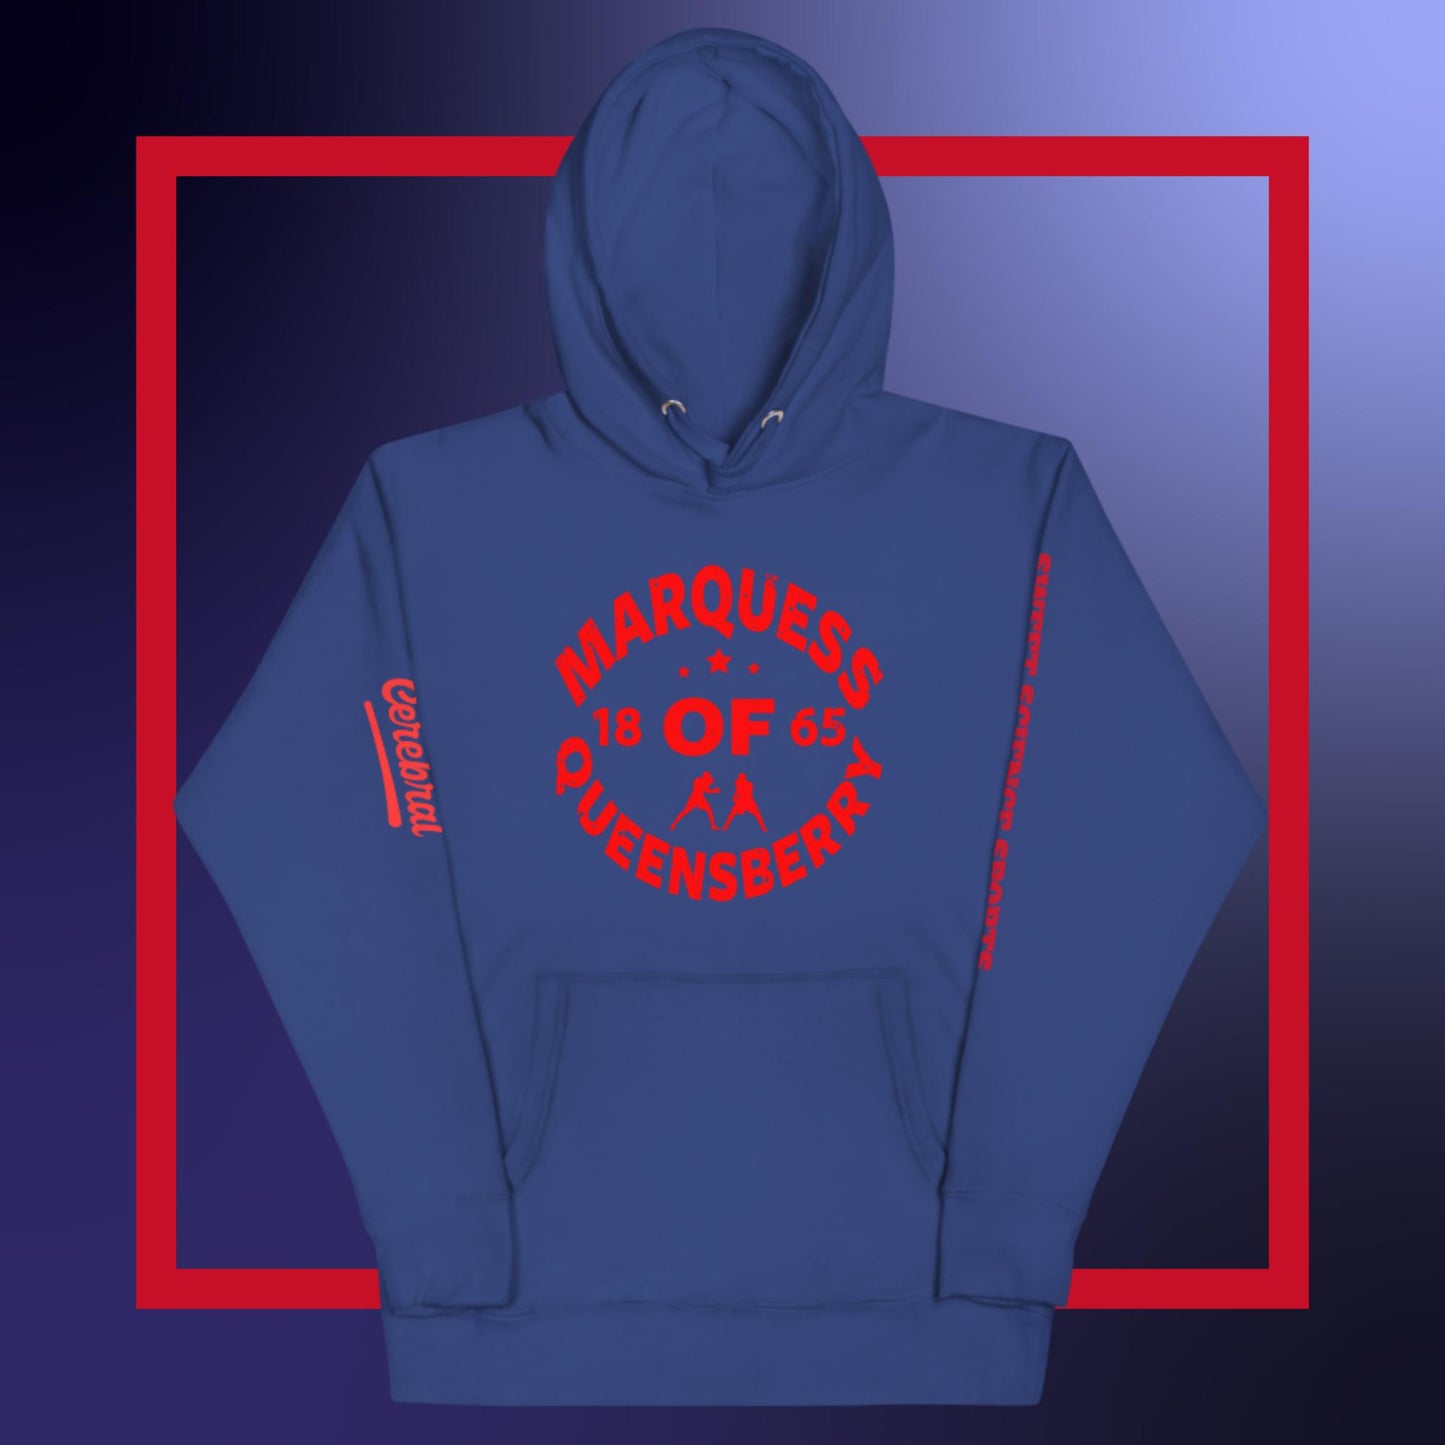 Sweet Science Sports Marquess Of Queensberry  Hoodie